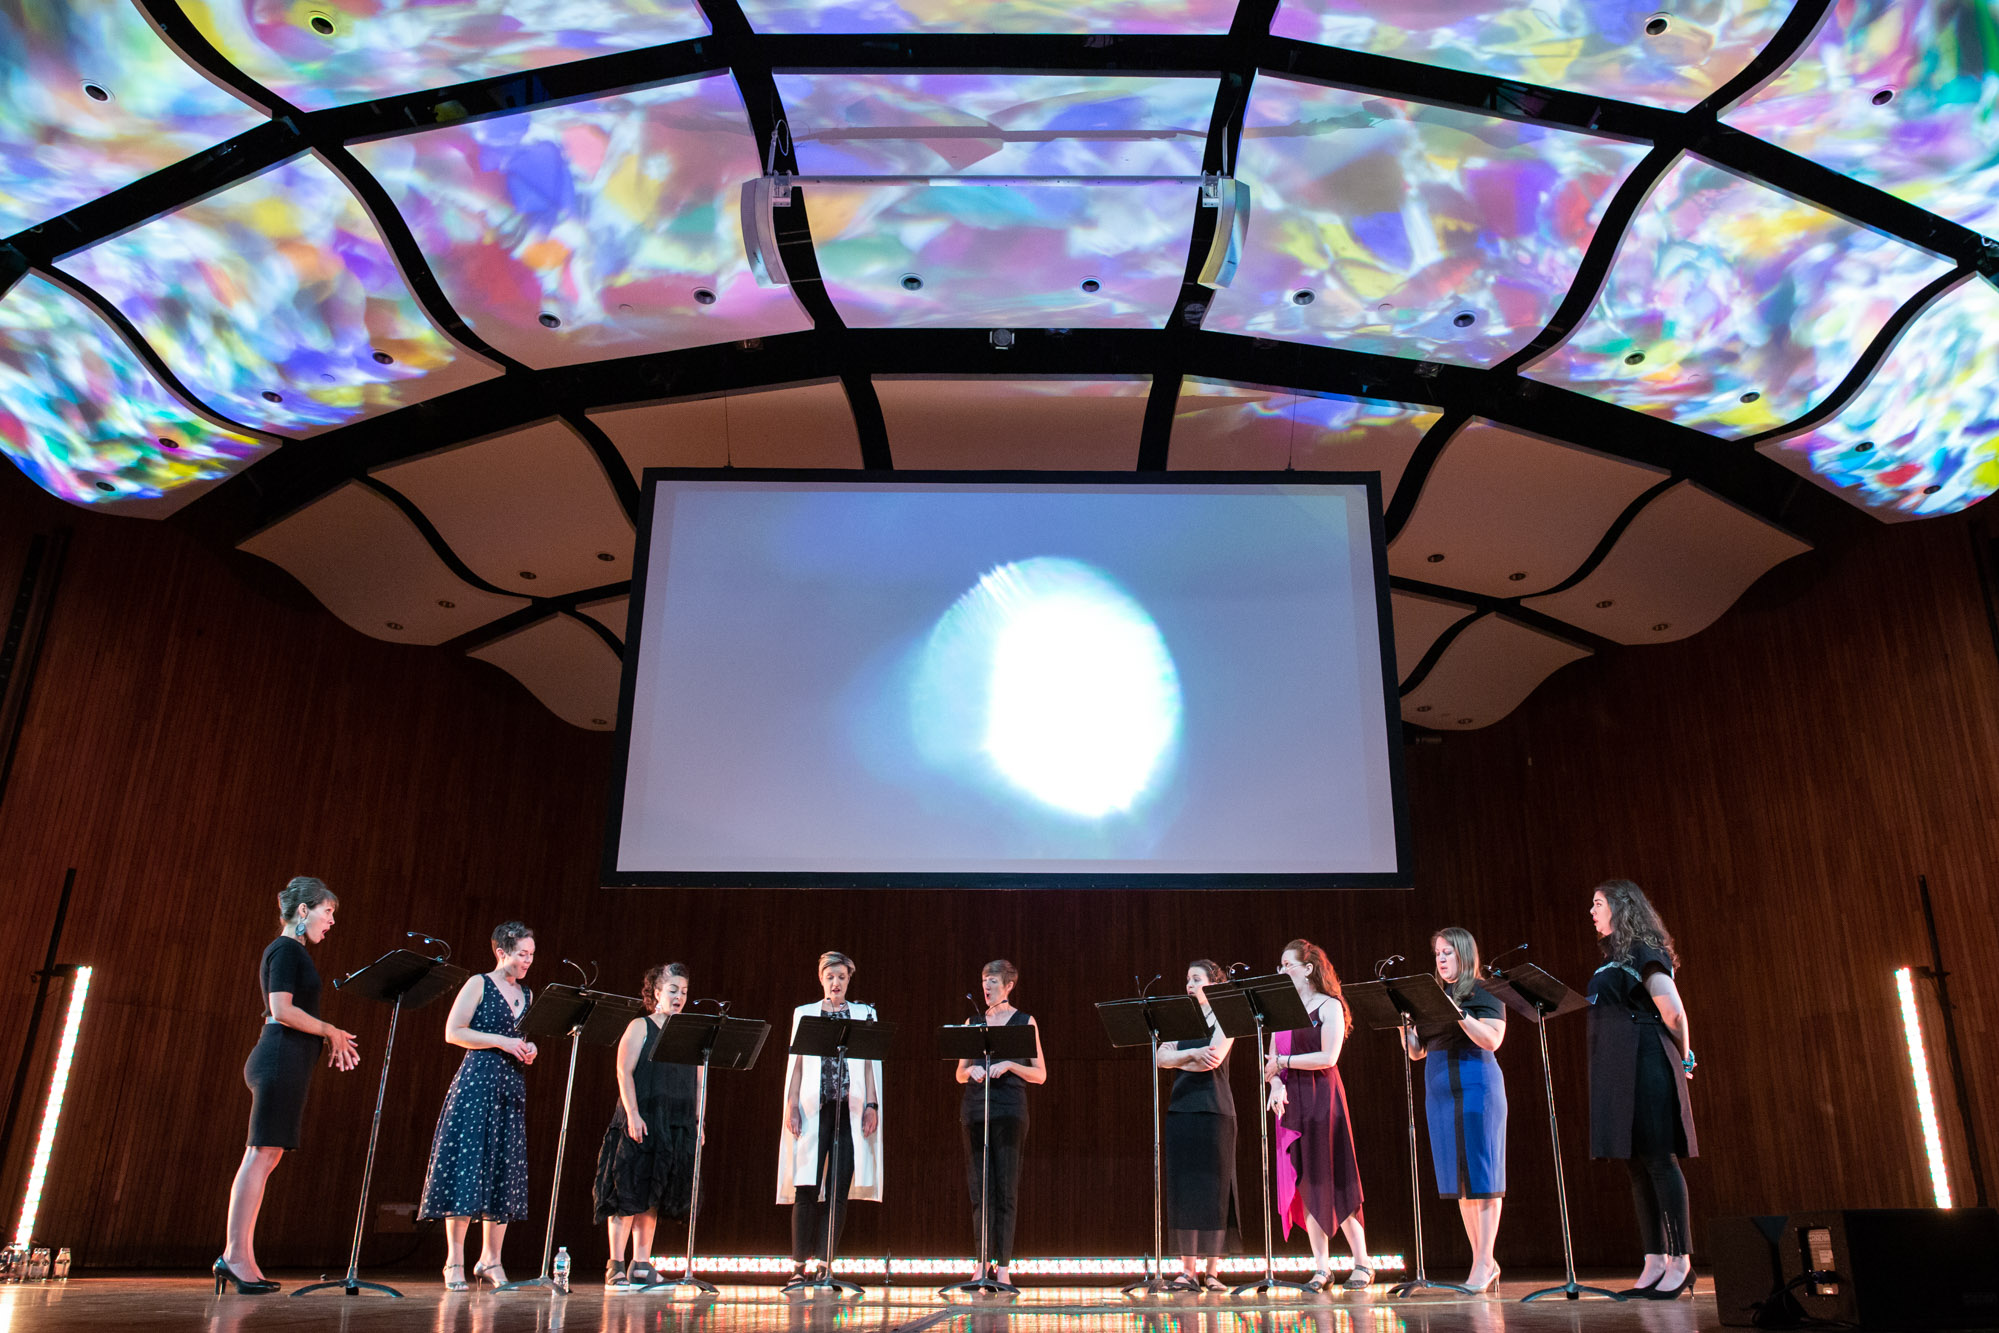 Nine women (lorelei ensemble) sing on a stage while multicolored projections float on the ceiling and a moon-like shape is projected on a screen behind them